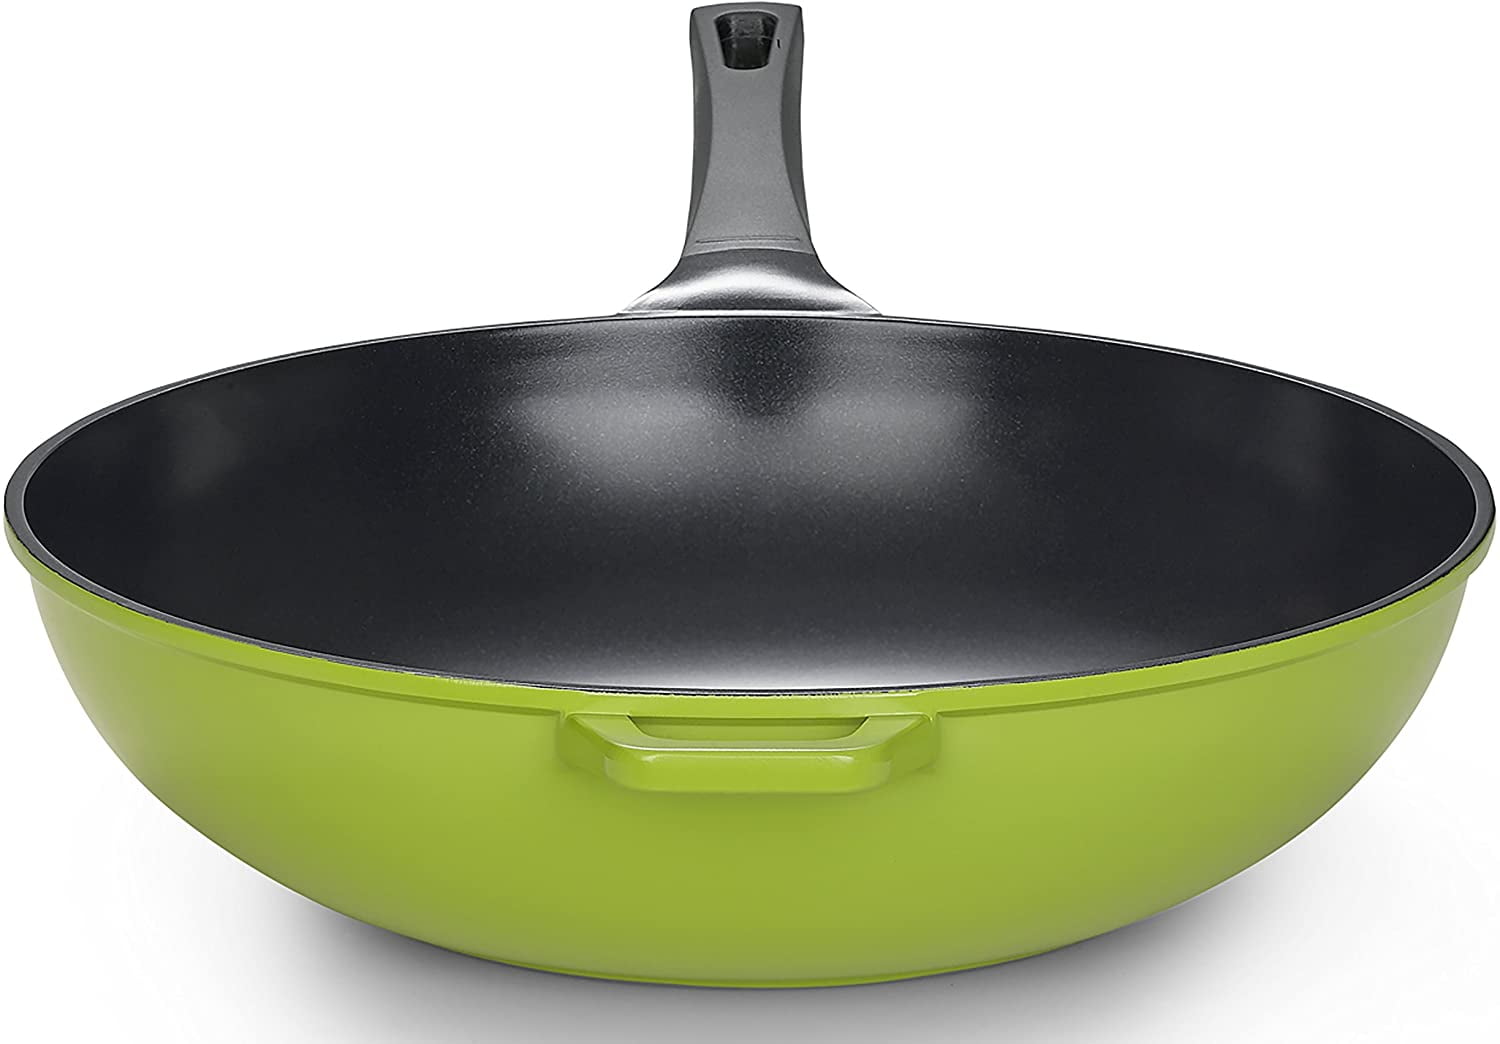 14 Green Ceramic Wok by Ozeri, with Smooth Ceramic Non-Stick Coating (100%  PTFE and PFOA Free)